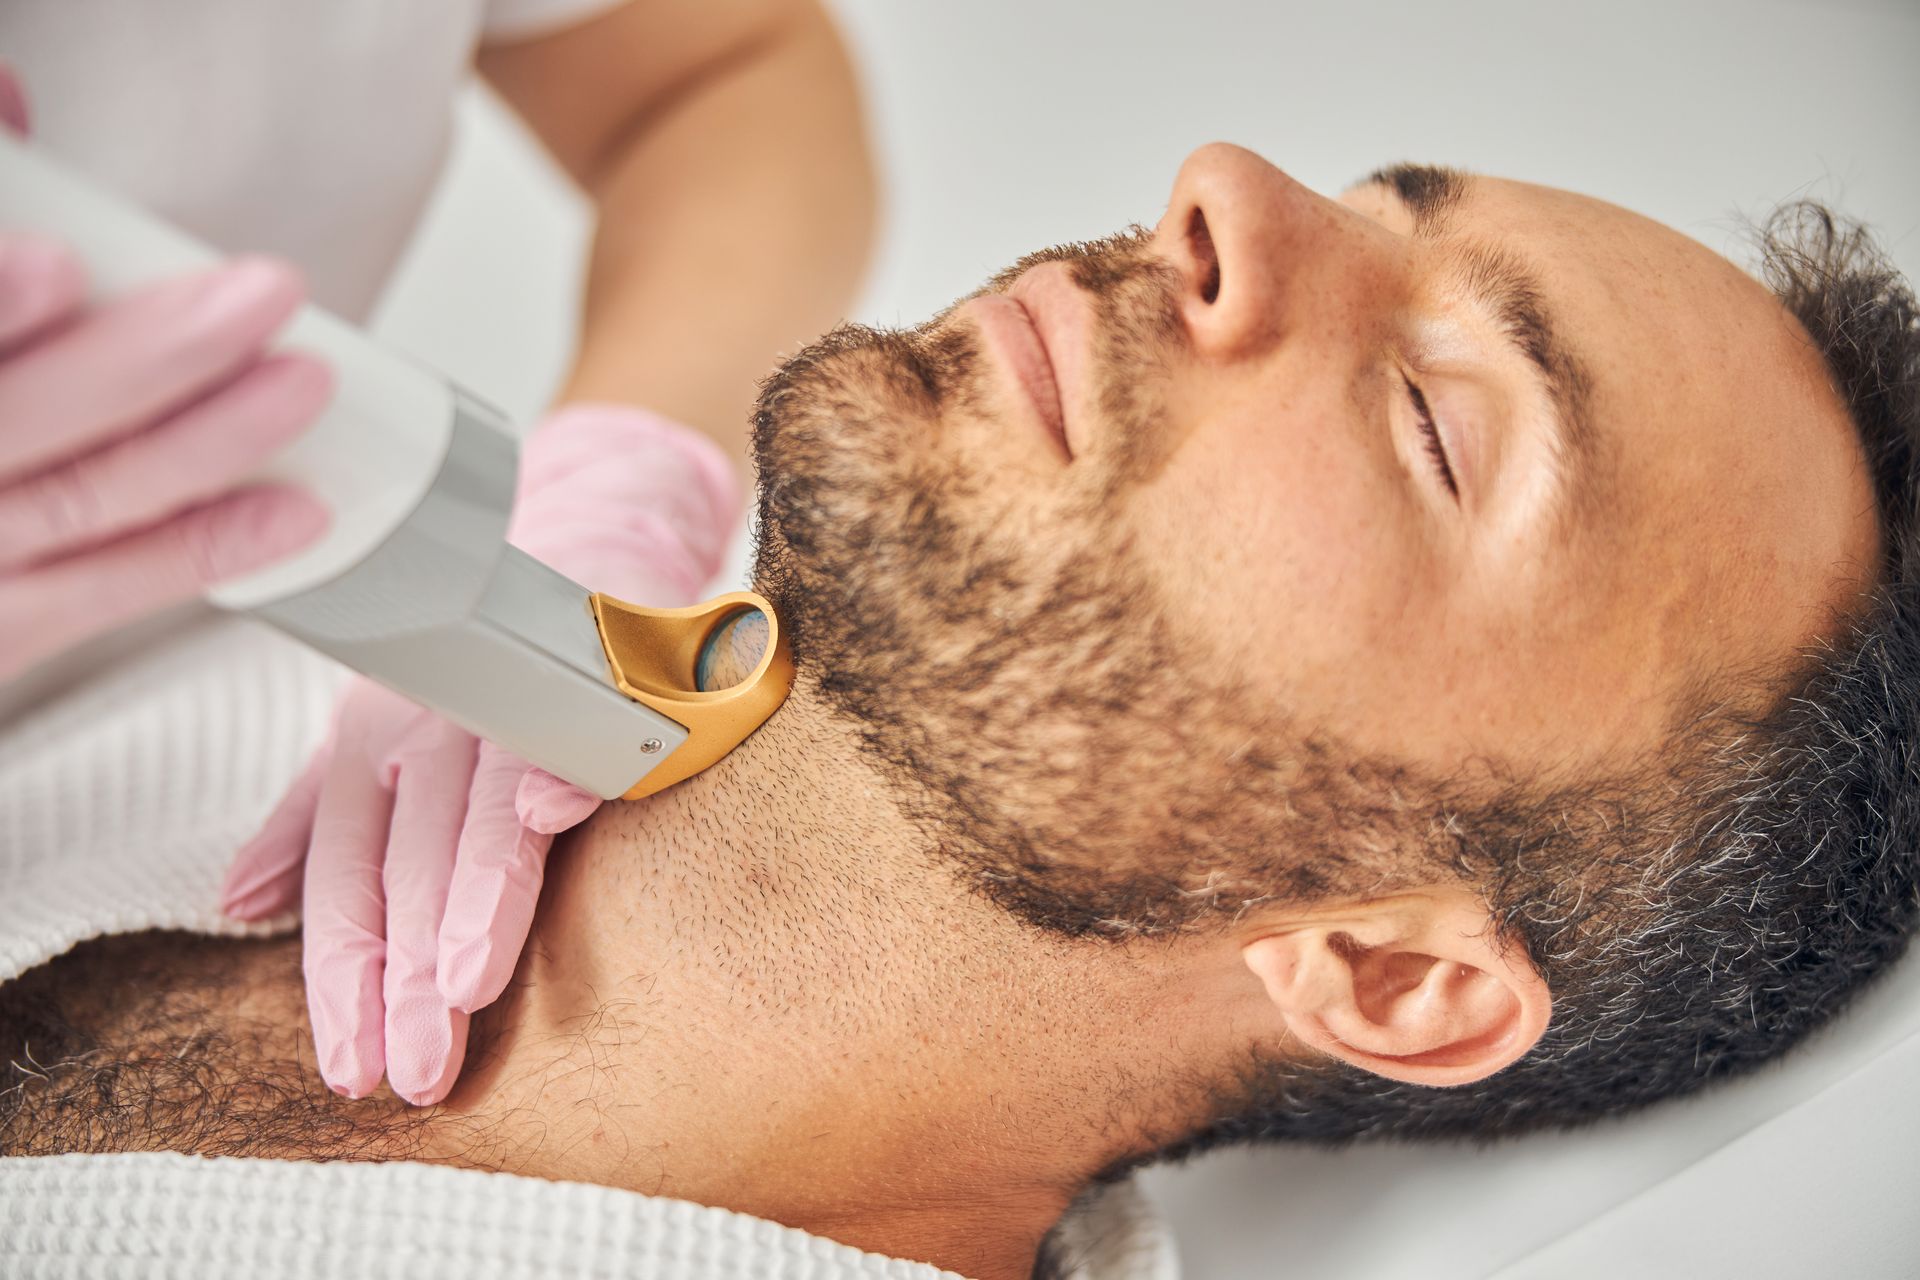 a man is getting a laser hair removal treatment on his neck .